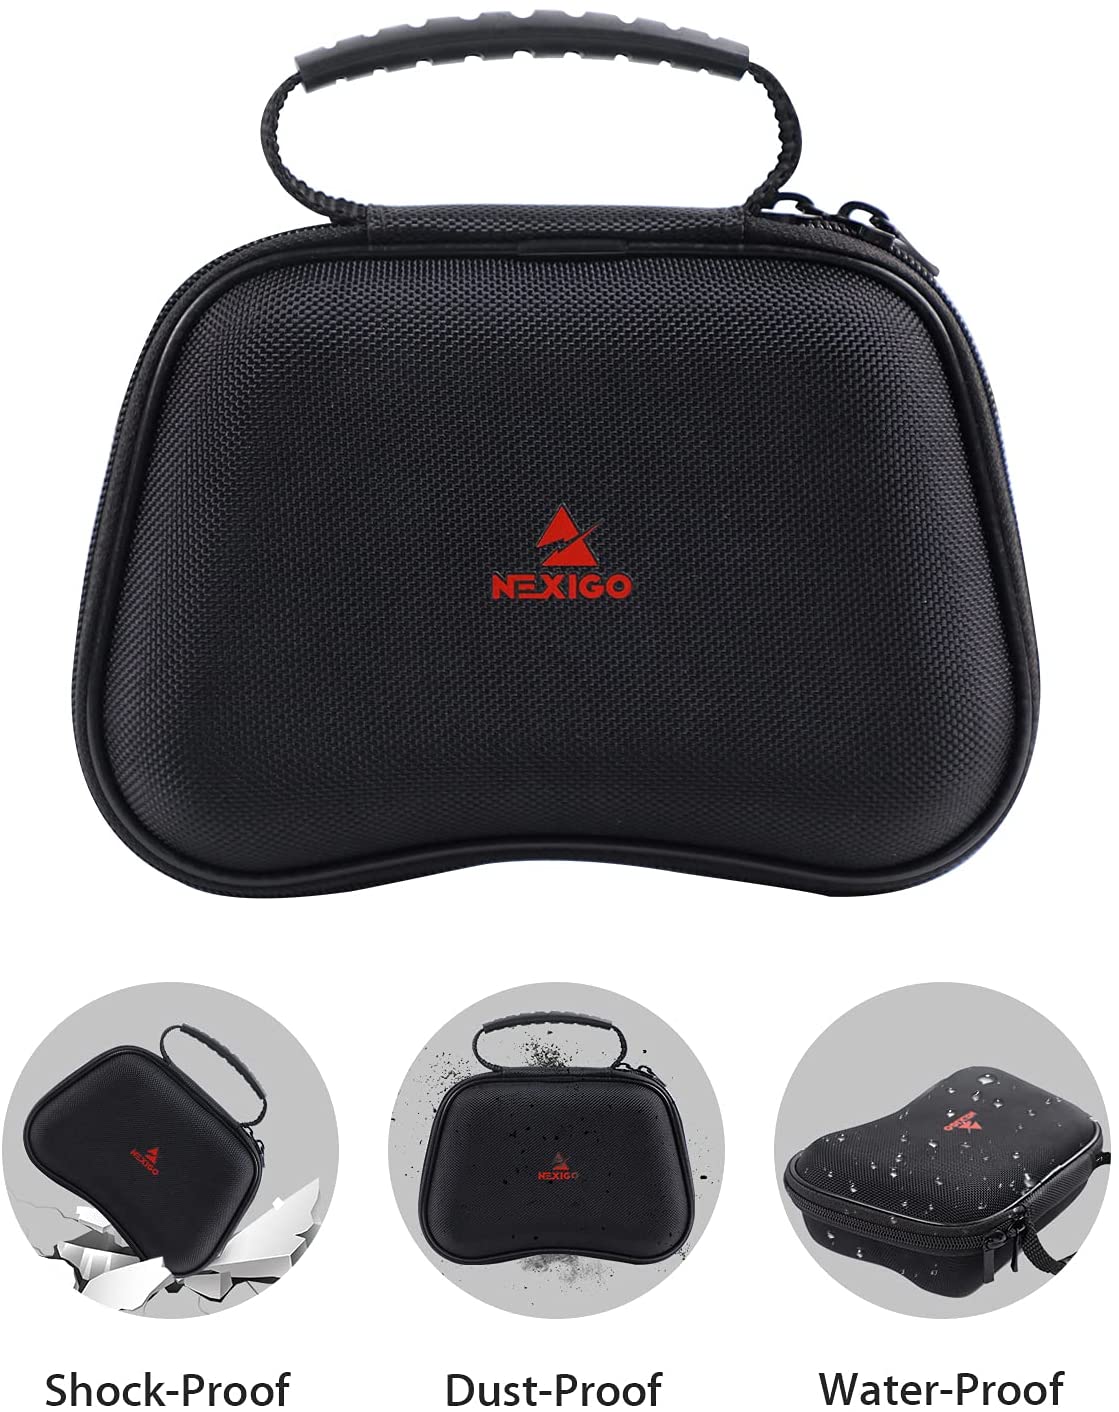 PS5 Controller Carrying Case - Durable, shockproof, waterproof, and dustproof.